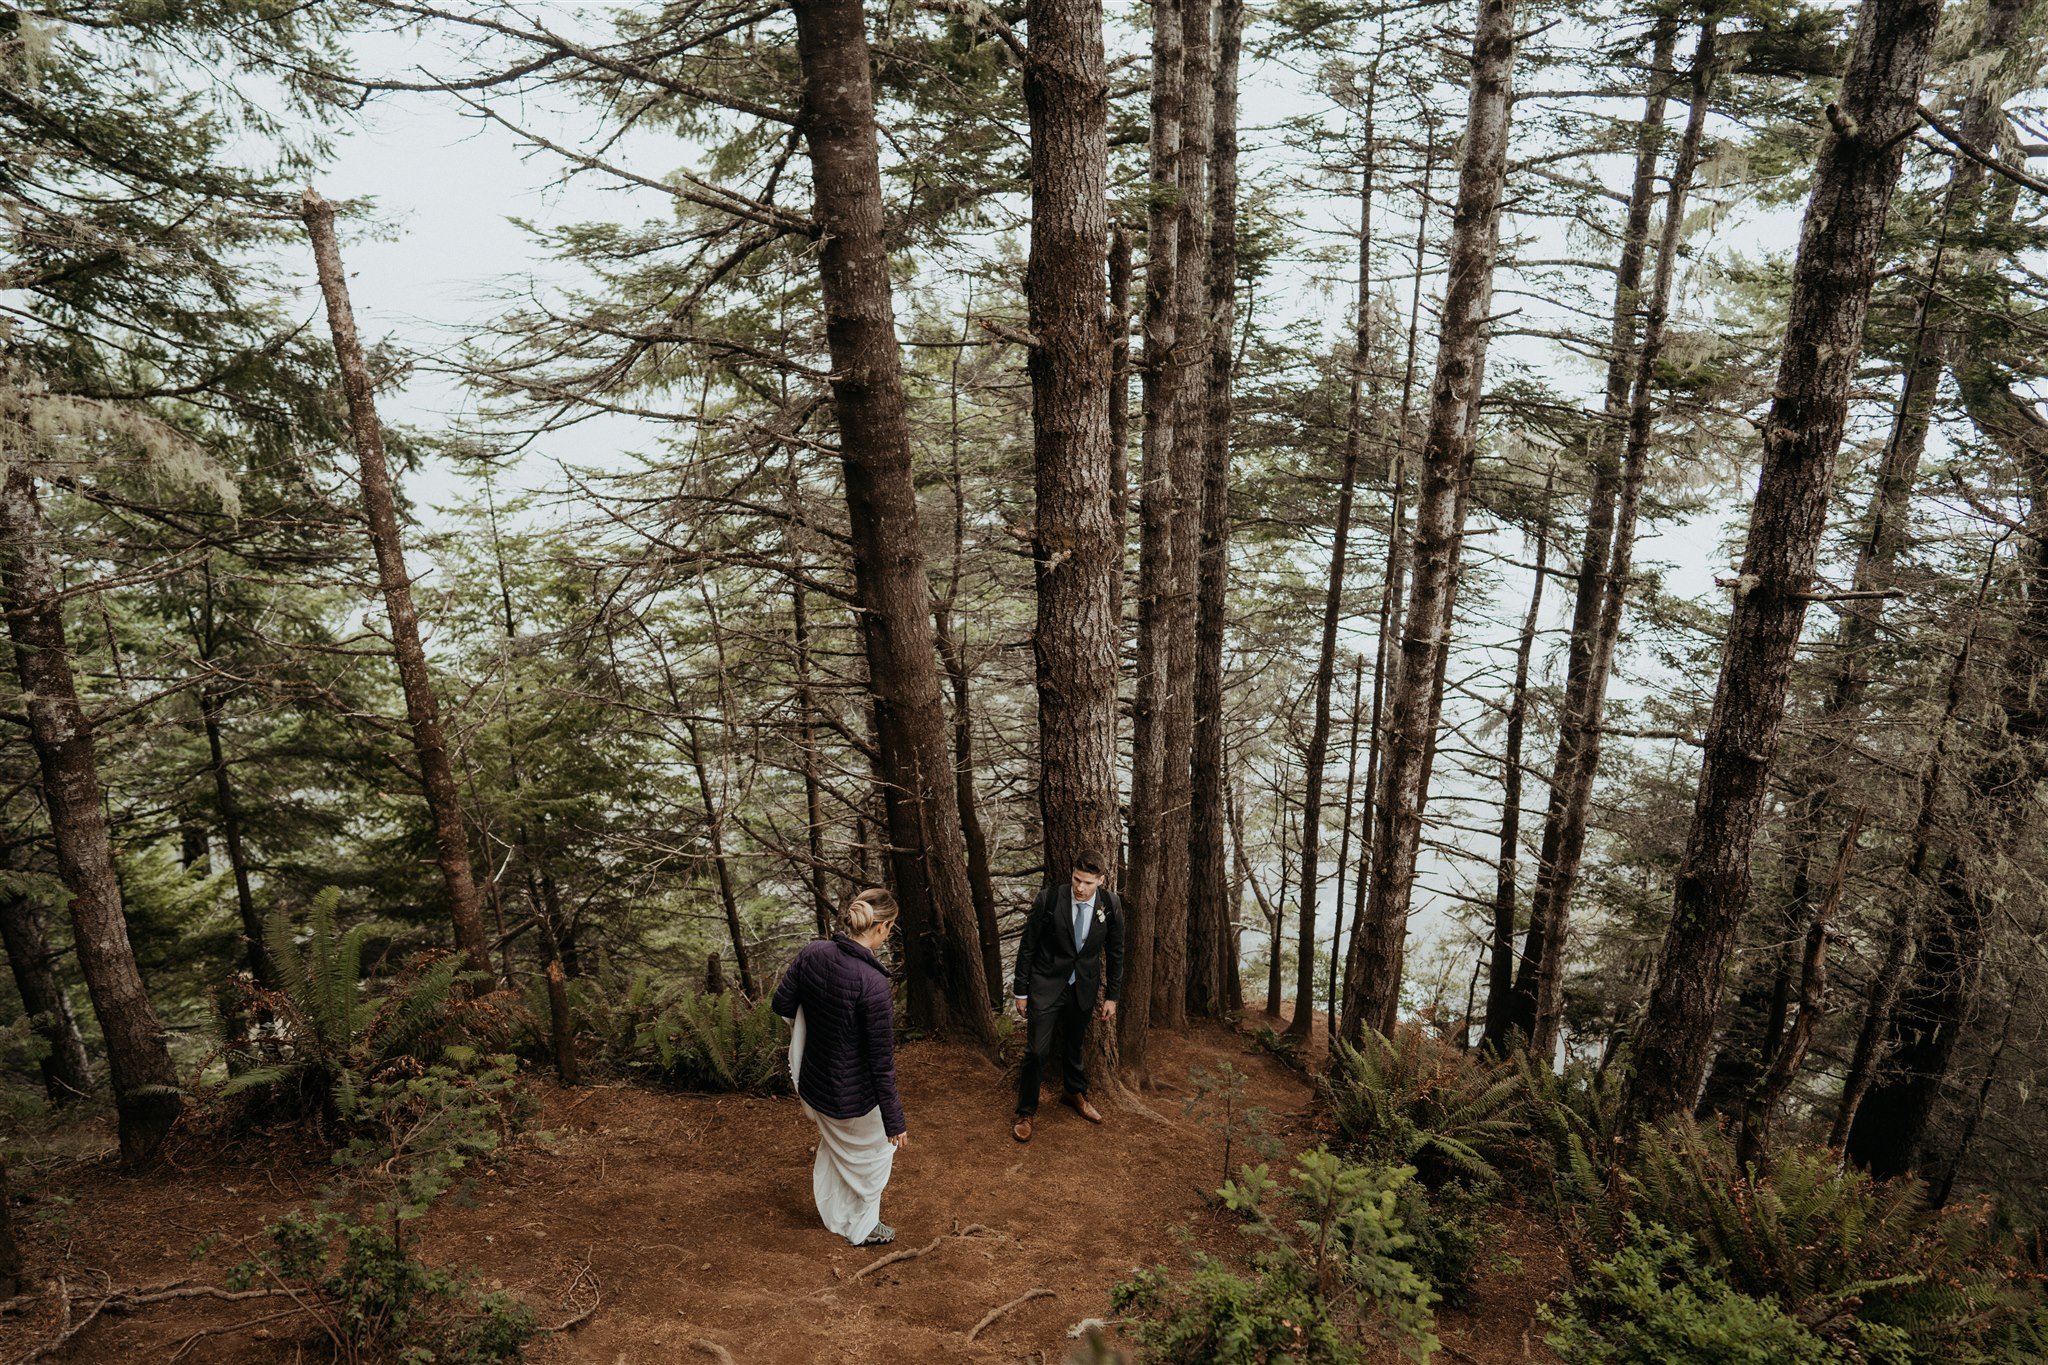 Bride and groom descending down a trail in the forest on the Southern Oregon Coast